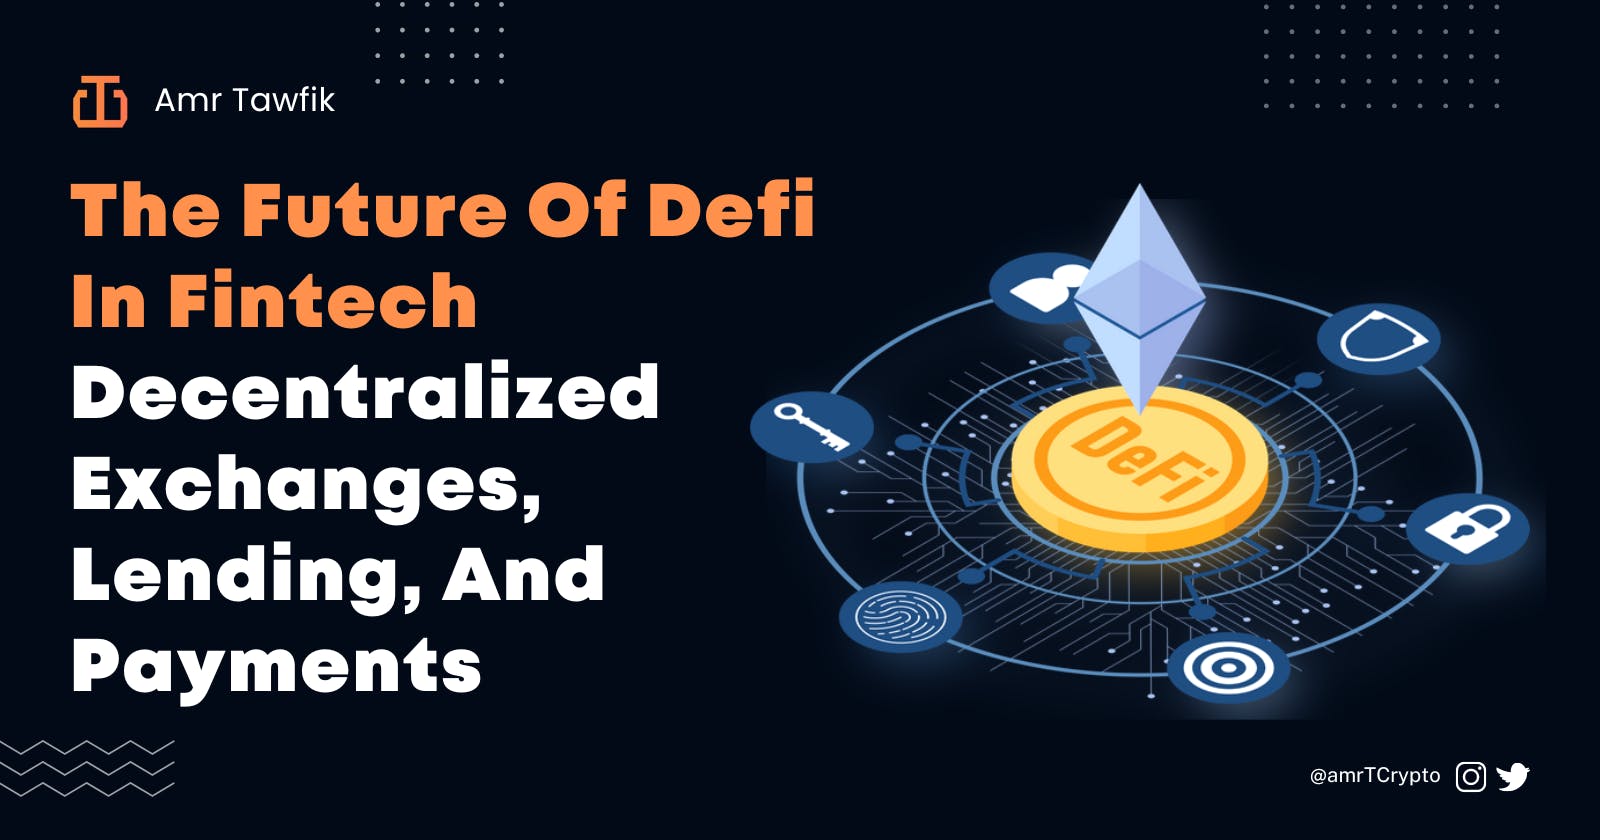 The Future Of Defi In Fintech: Decentralized Exchanges, Lending, And Payments